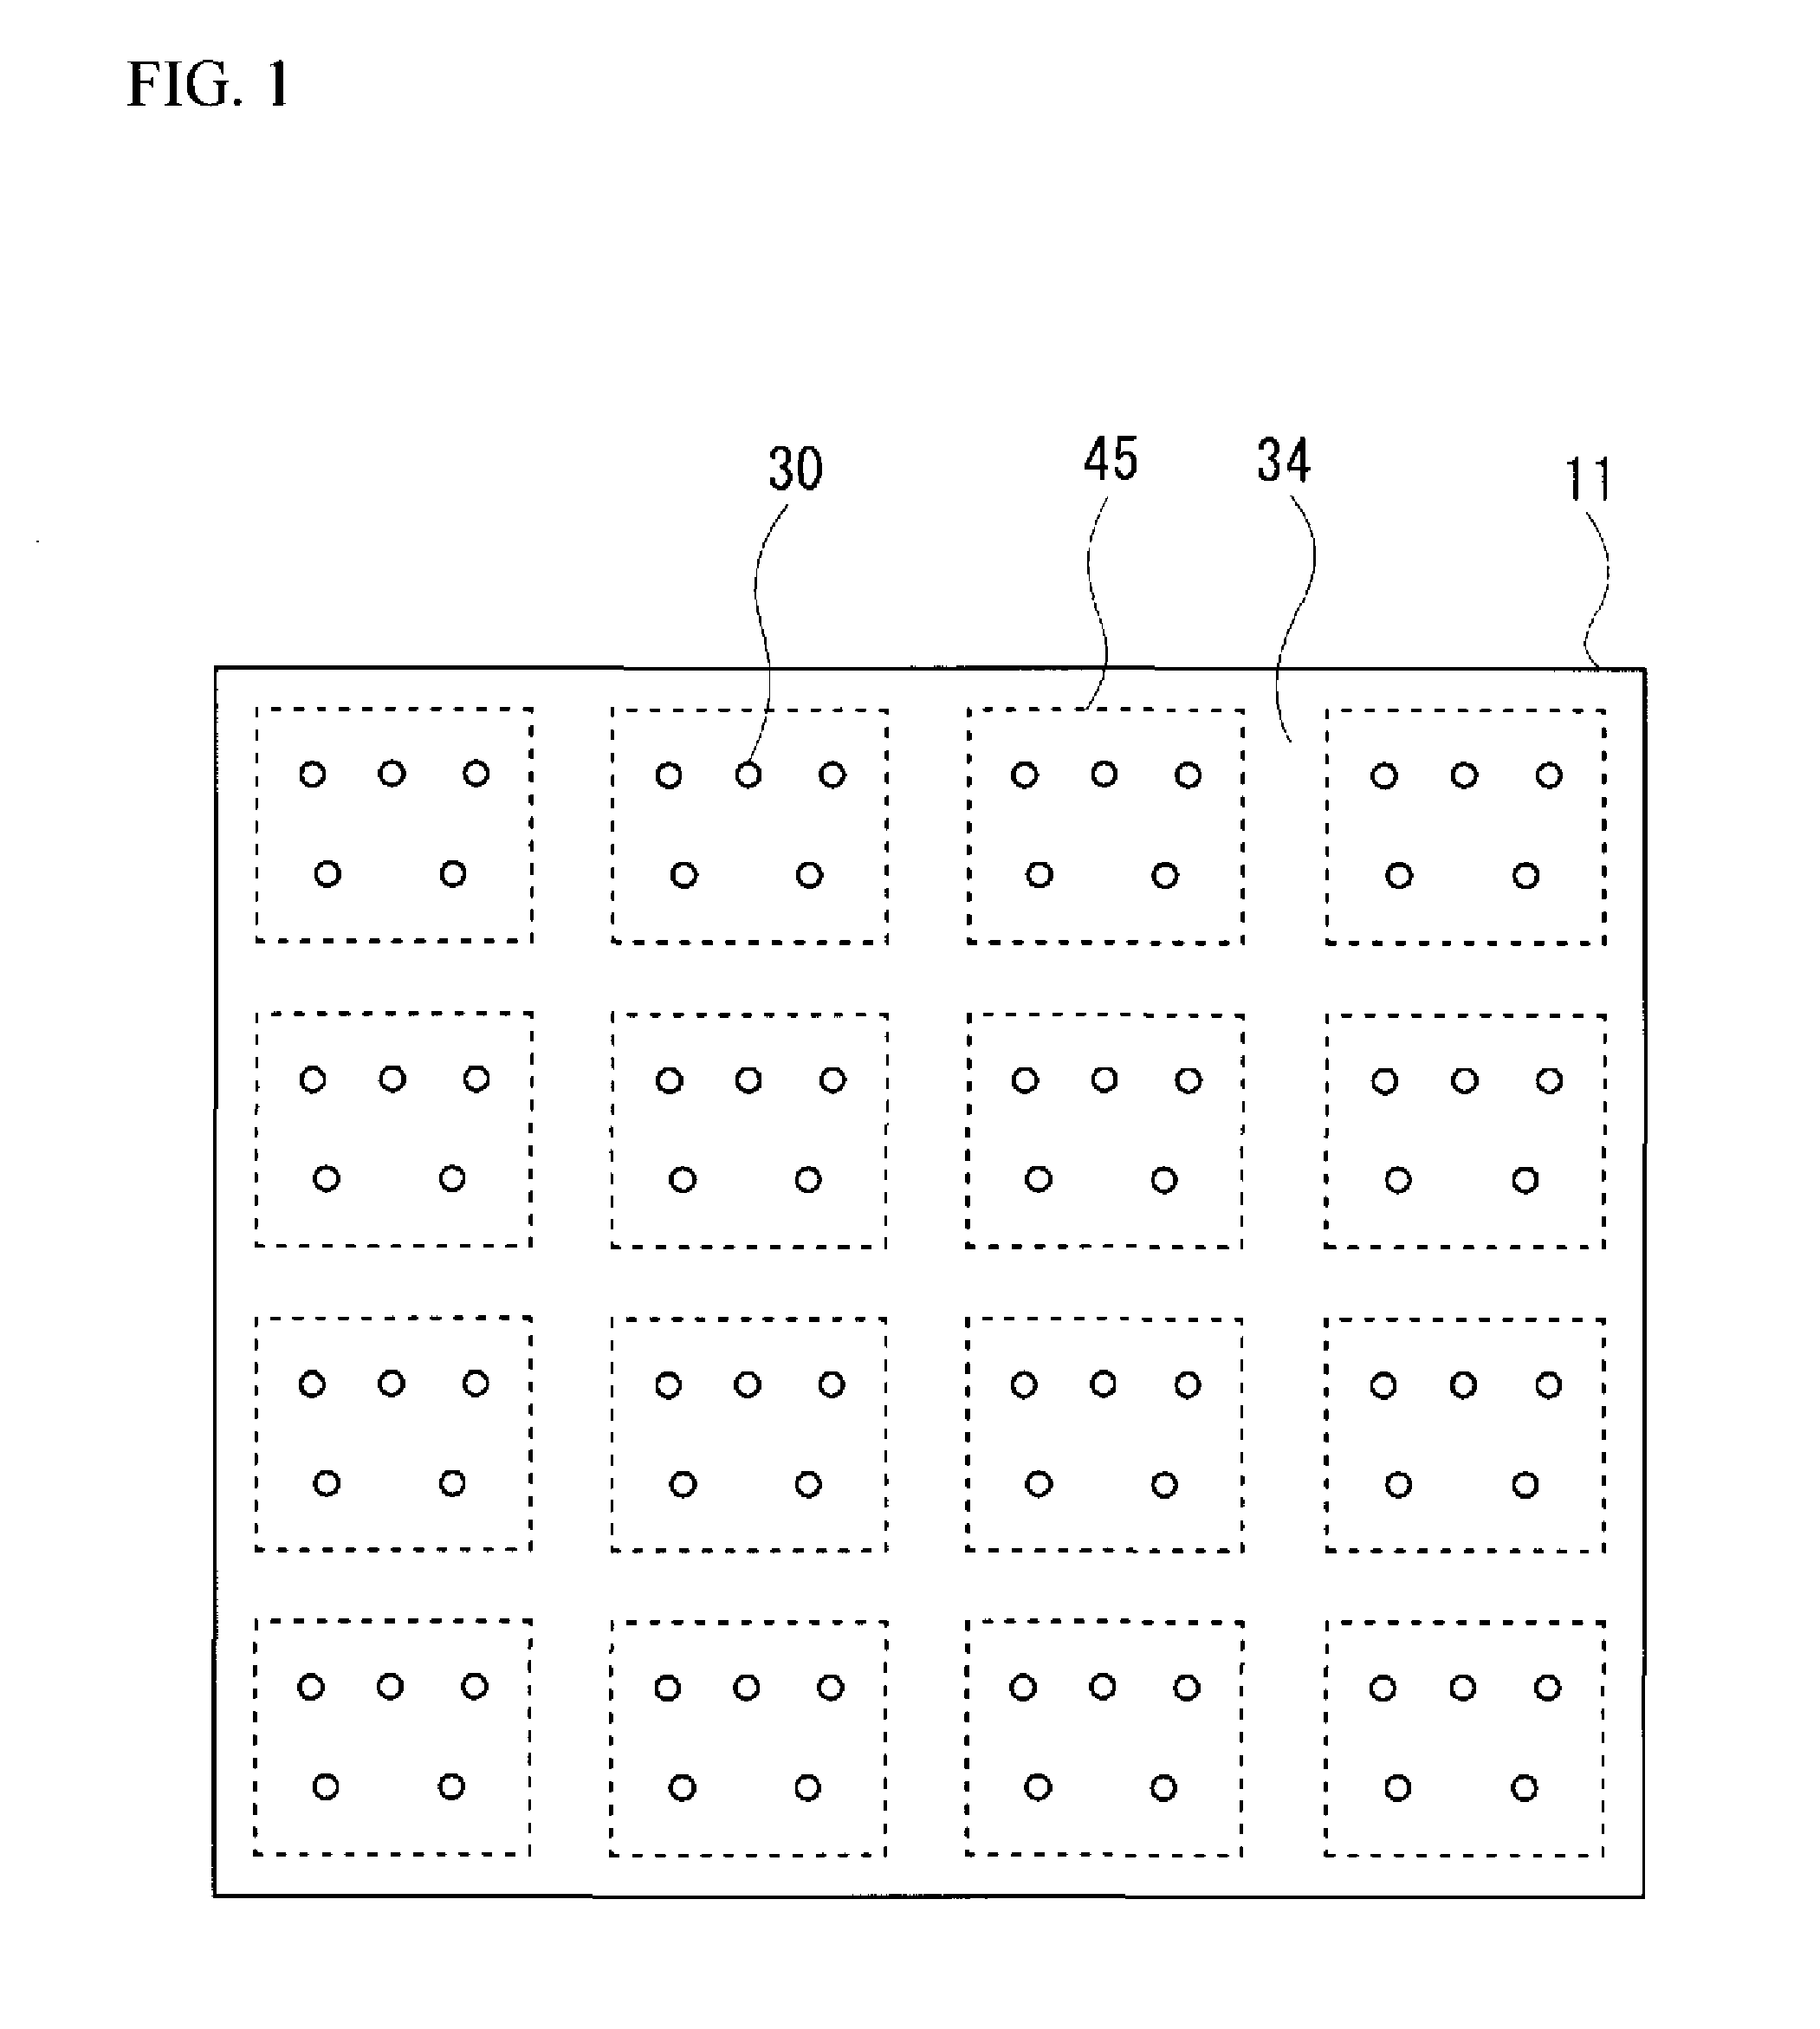 Manufacturing method of semiconductor device